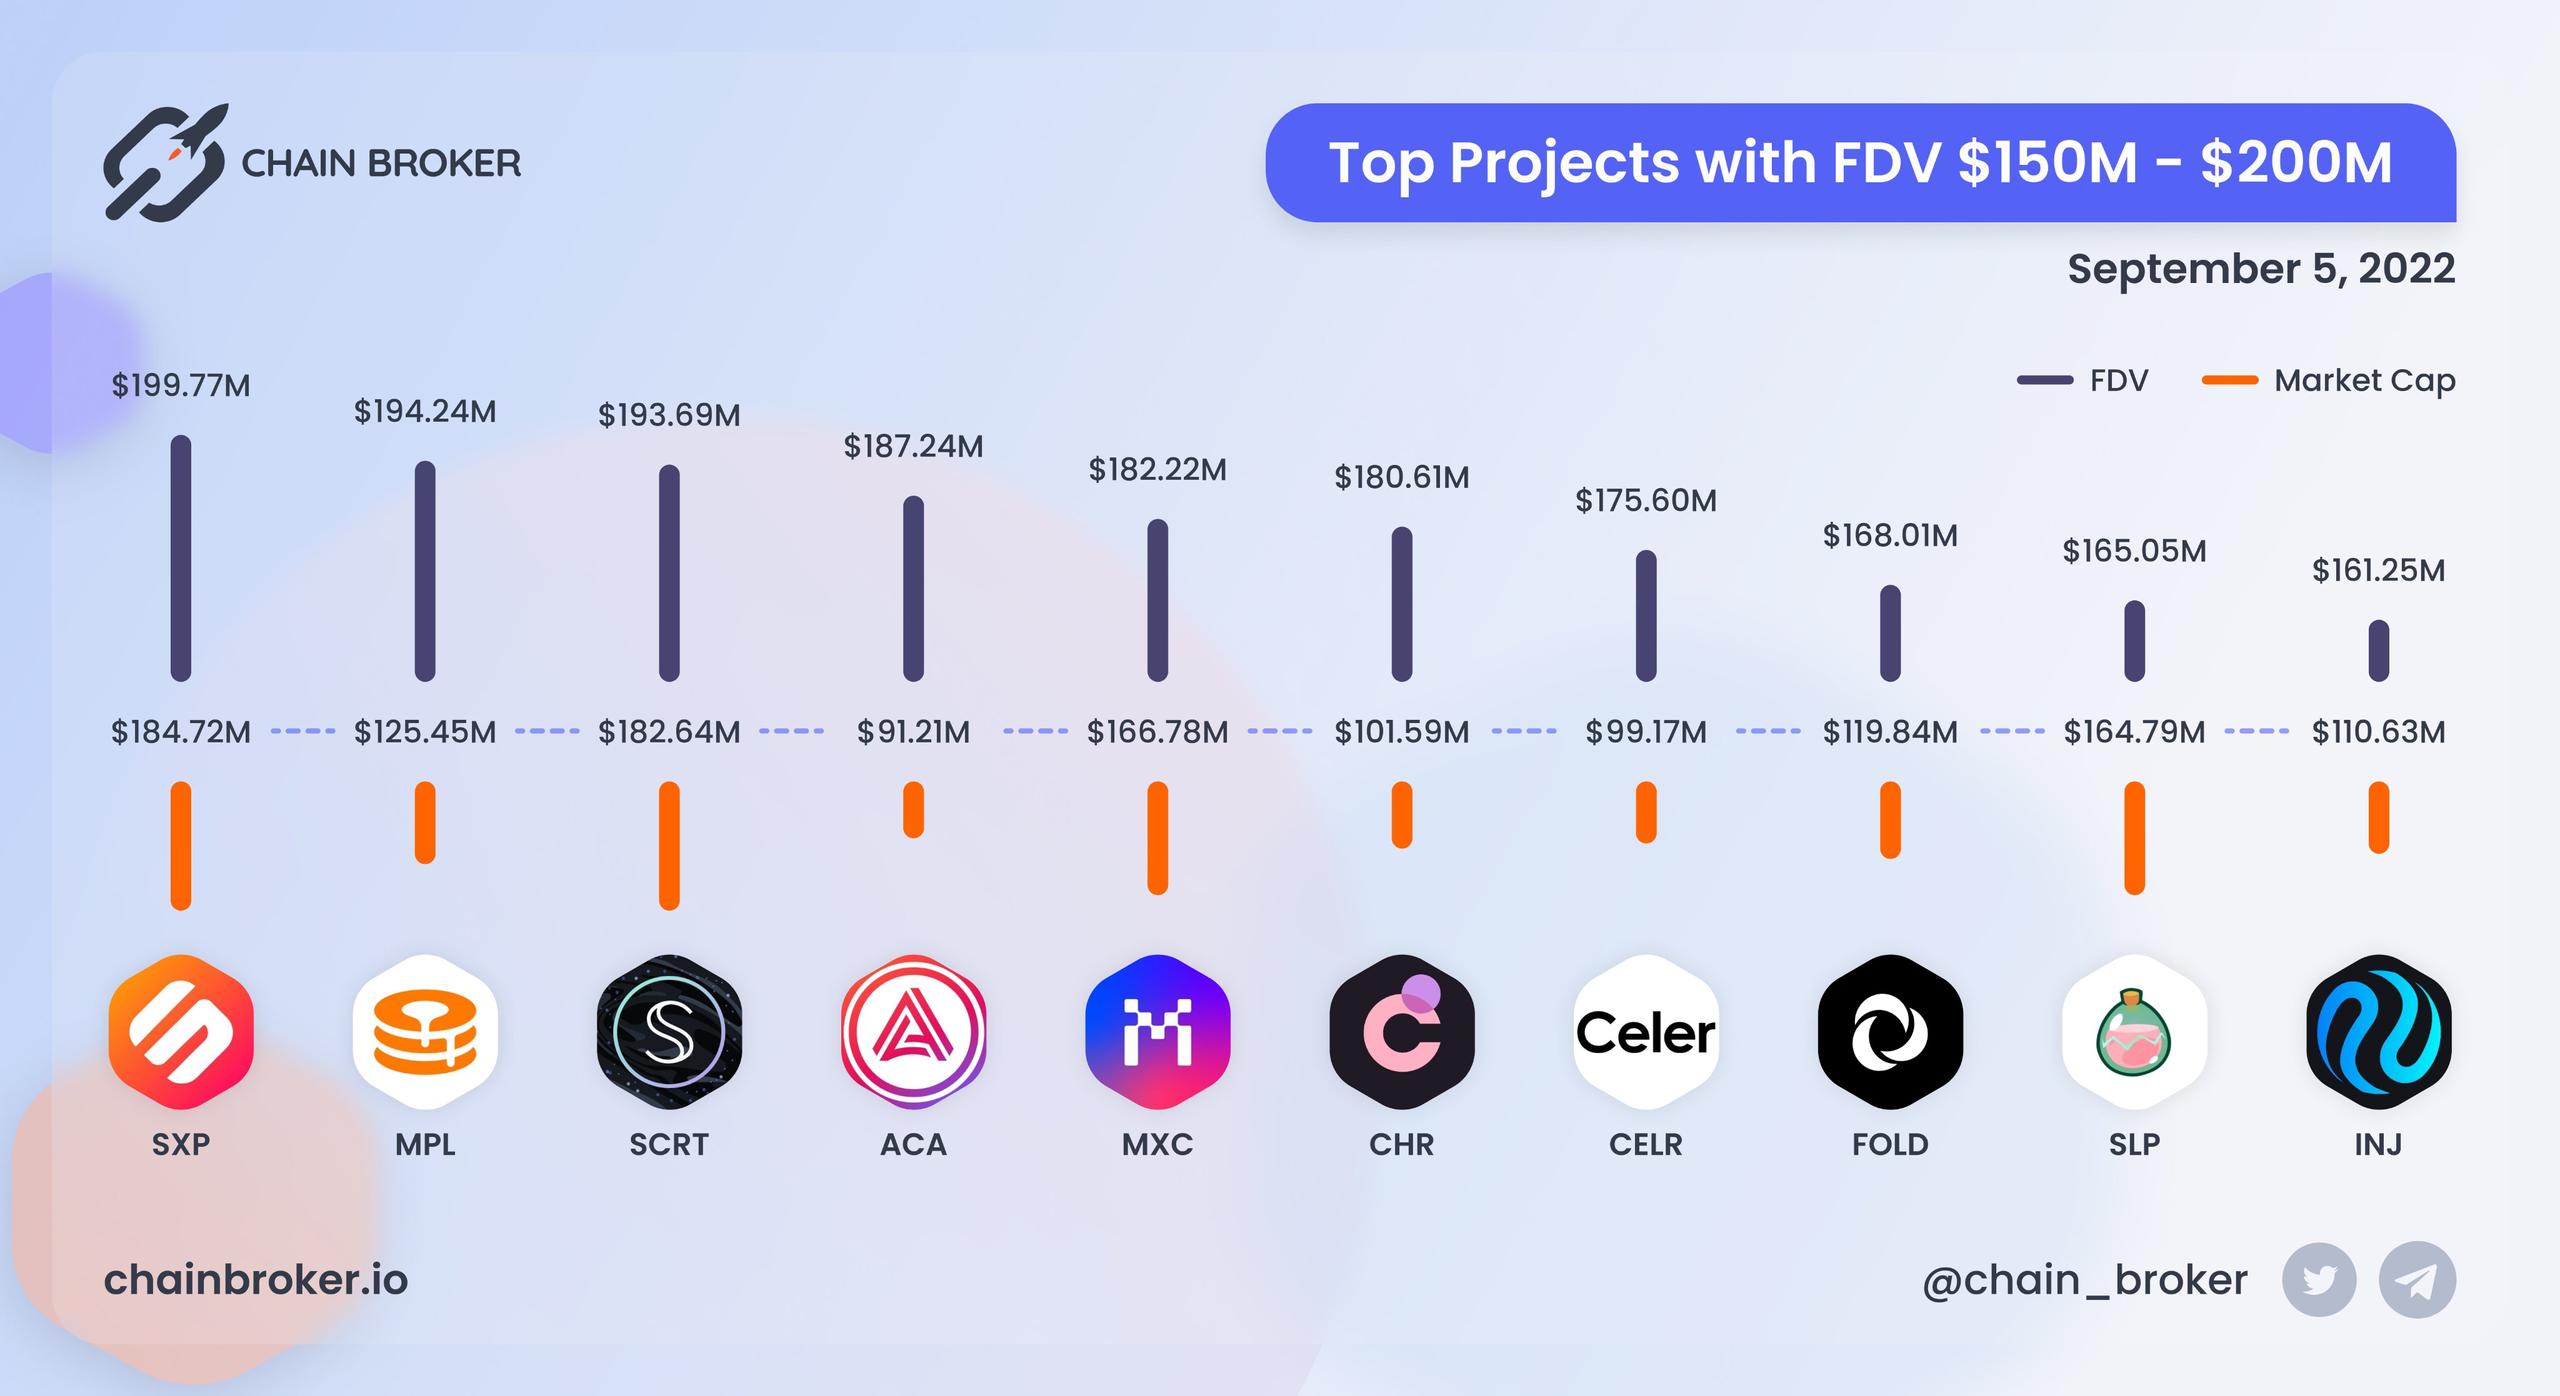 Top projcts with FDV $150M - $200M